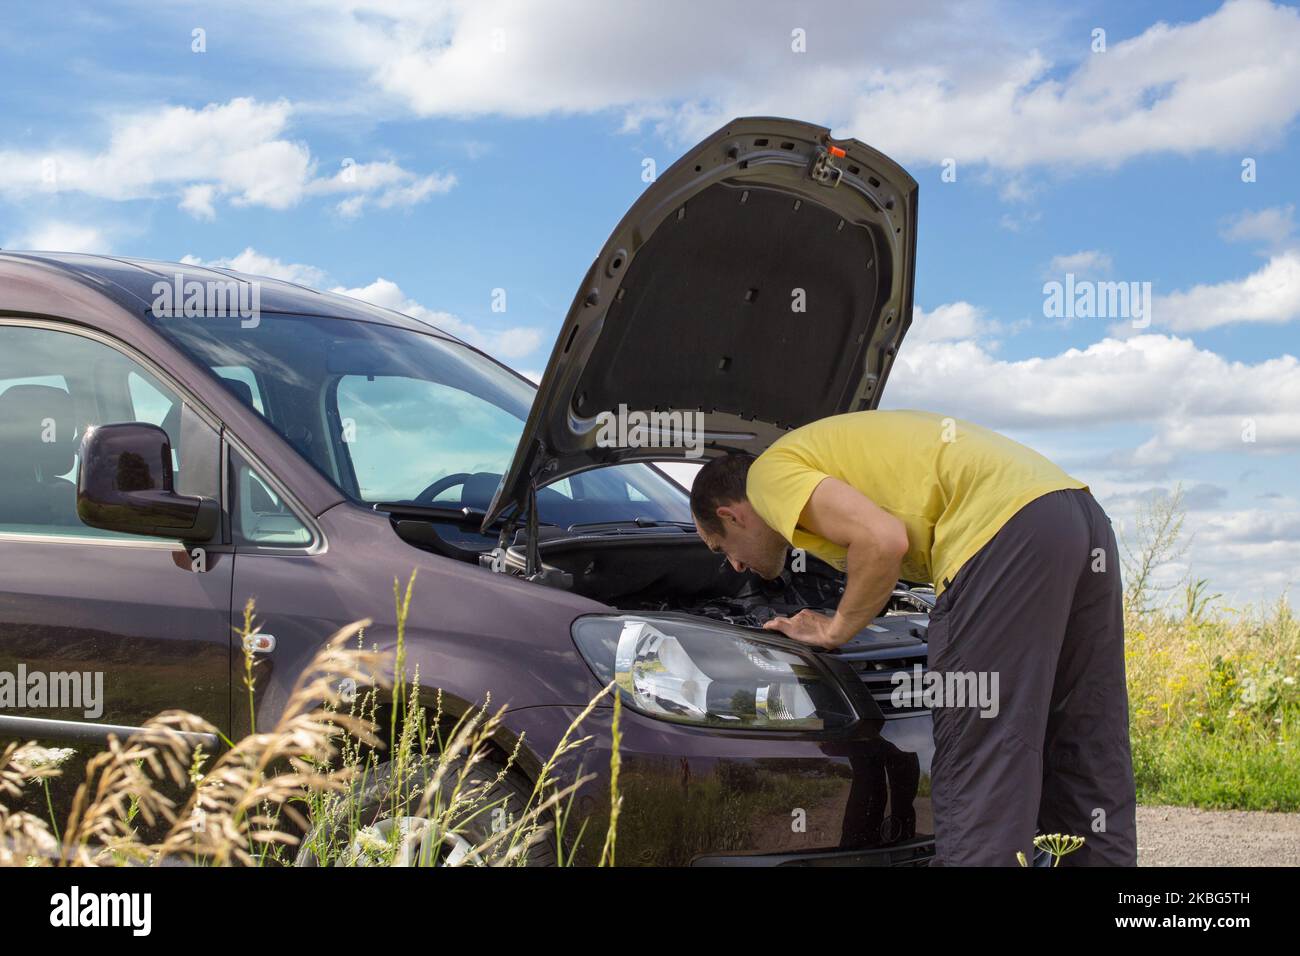 A man on the road repairs a car under the hood Stock Photo